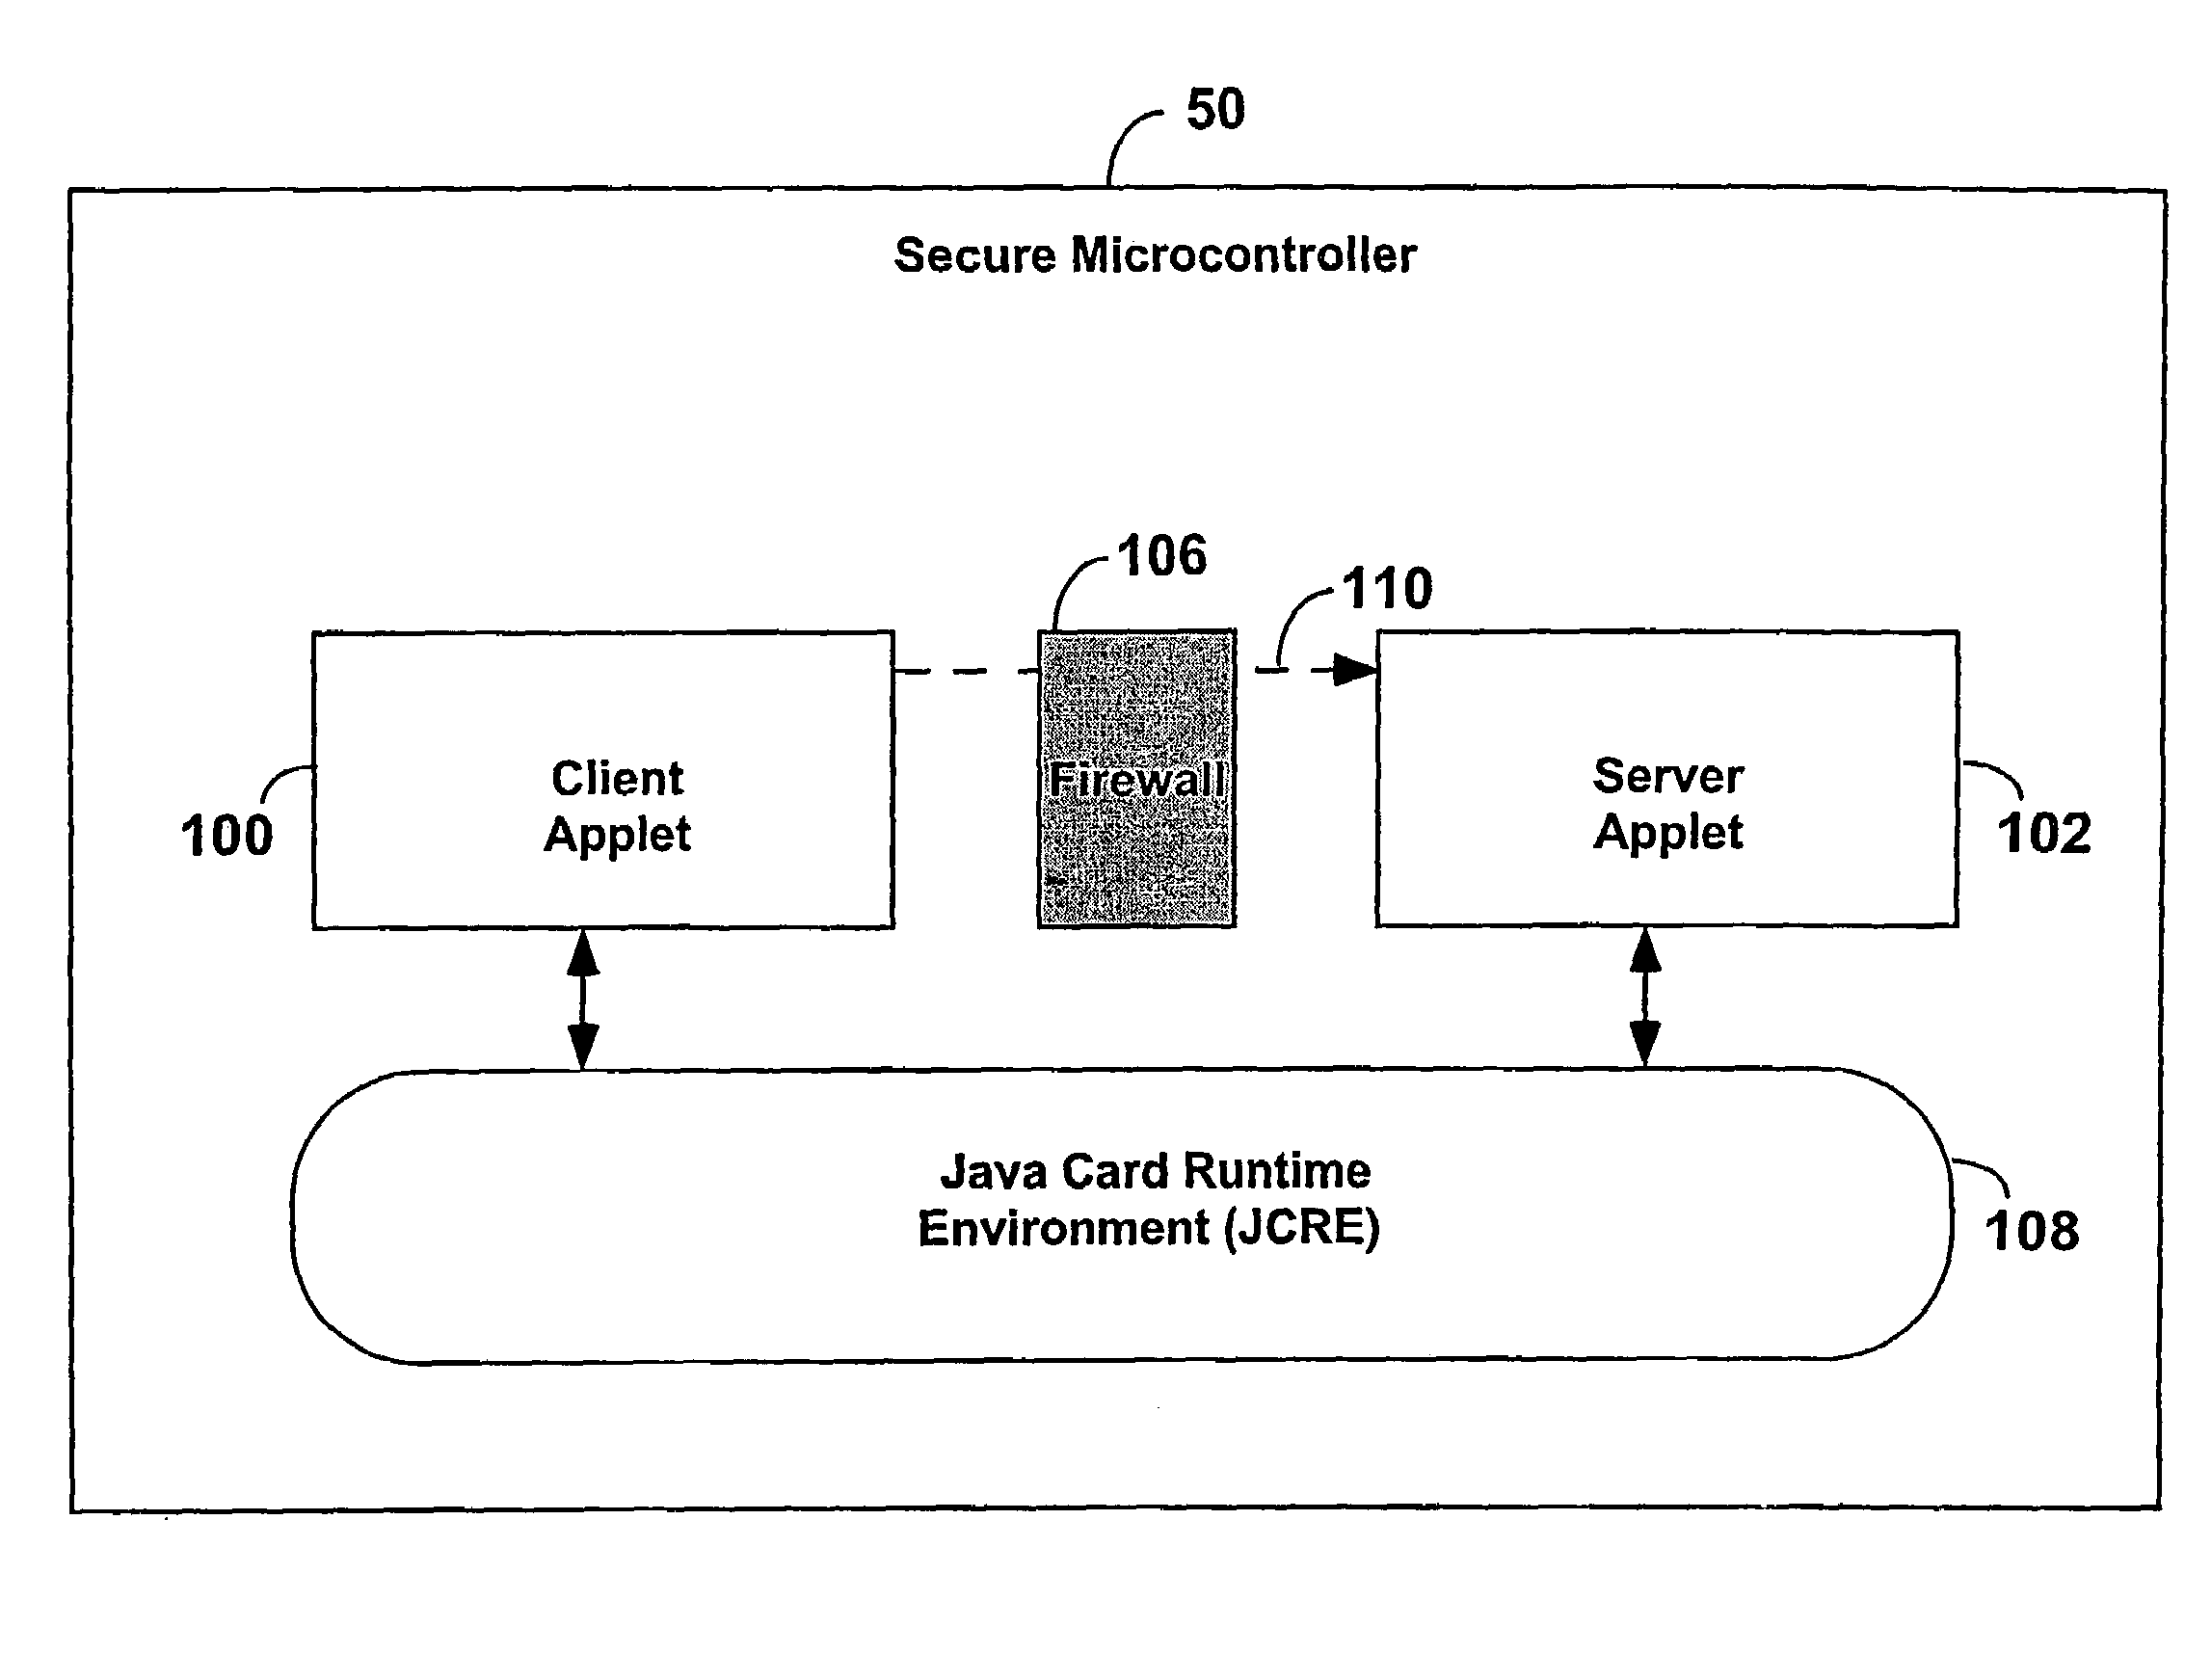 Secure sharing of application methods on a microcontroller